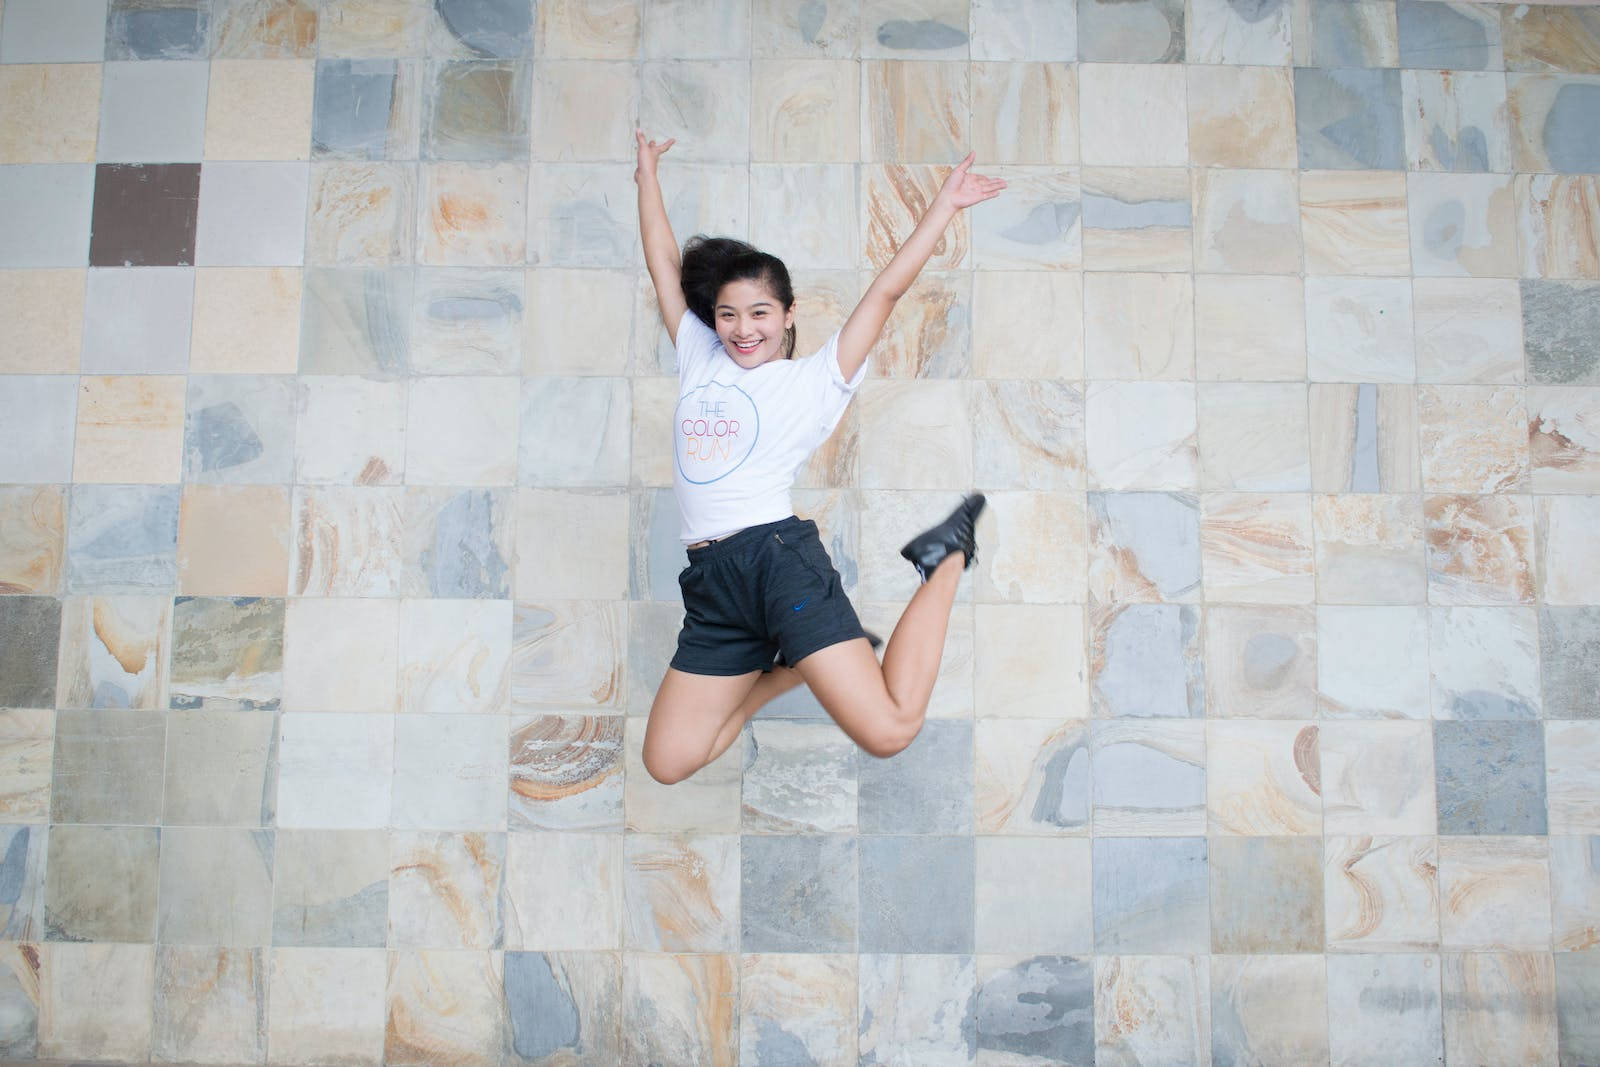 Athletic Jumping Against Tile Background